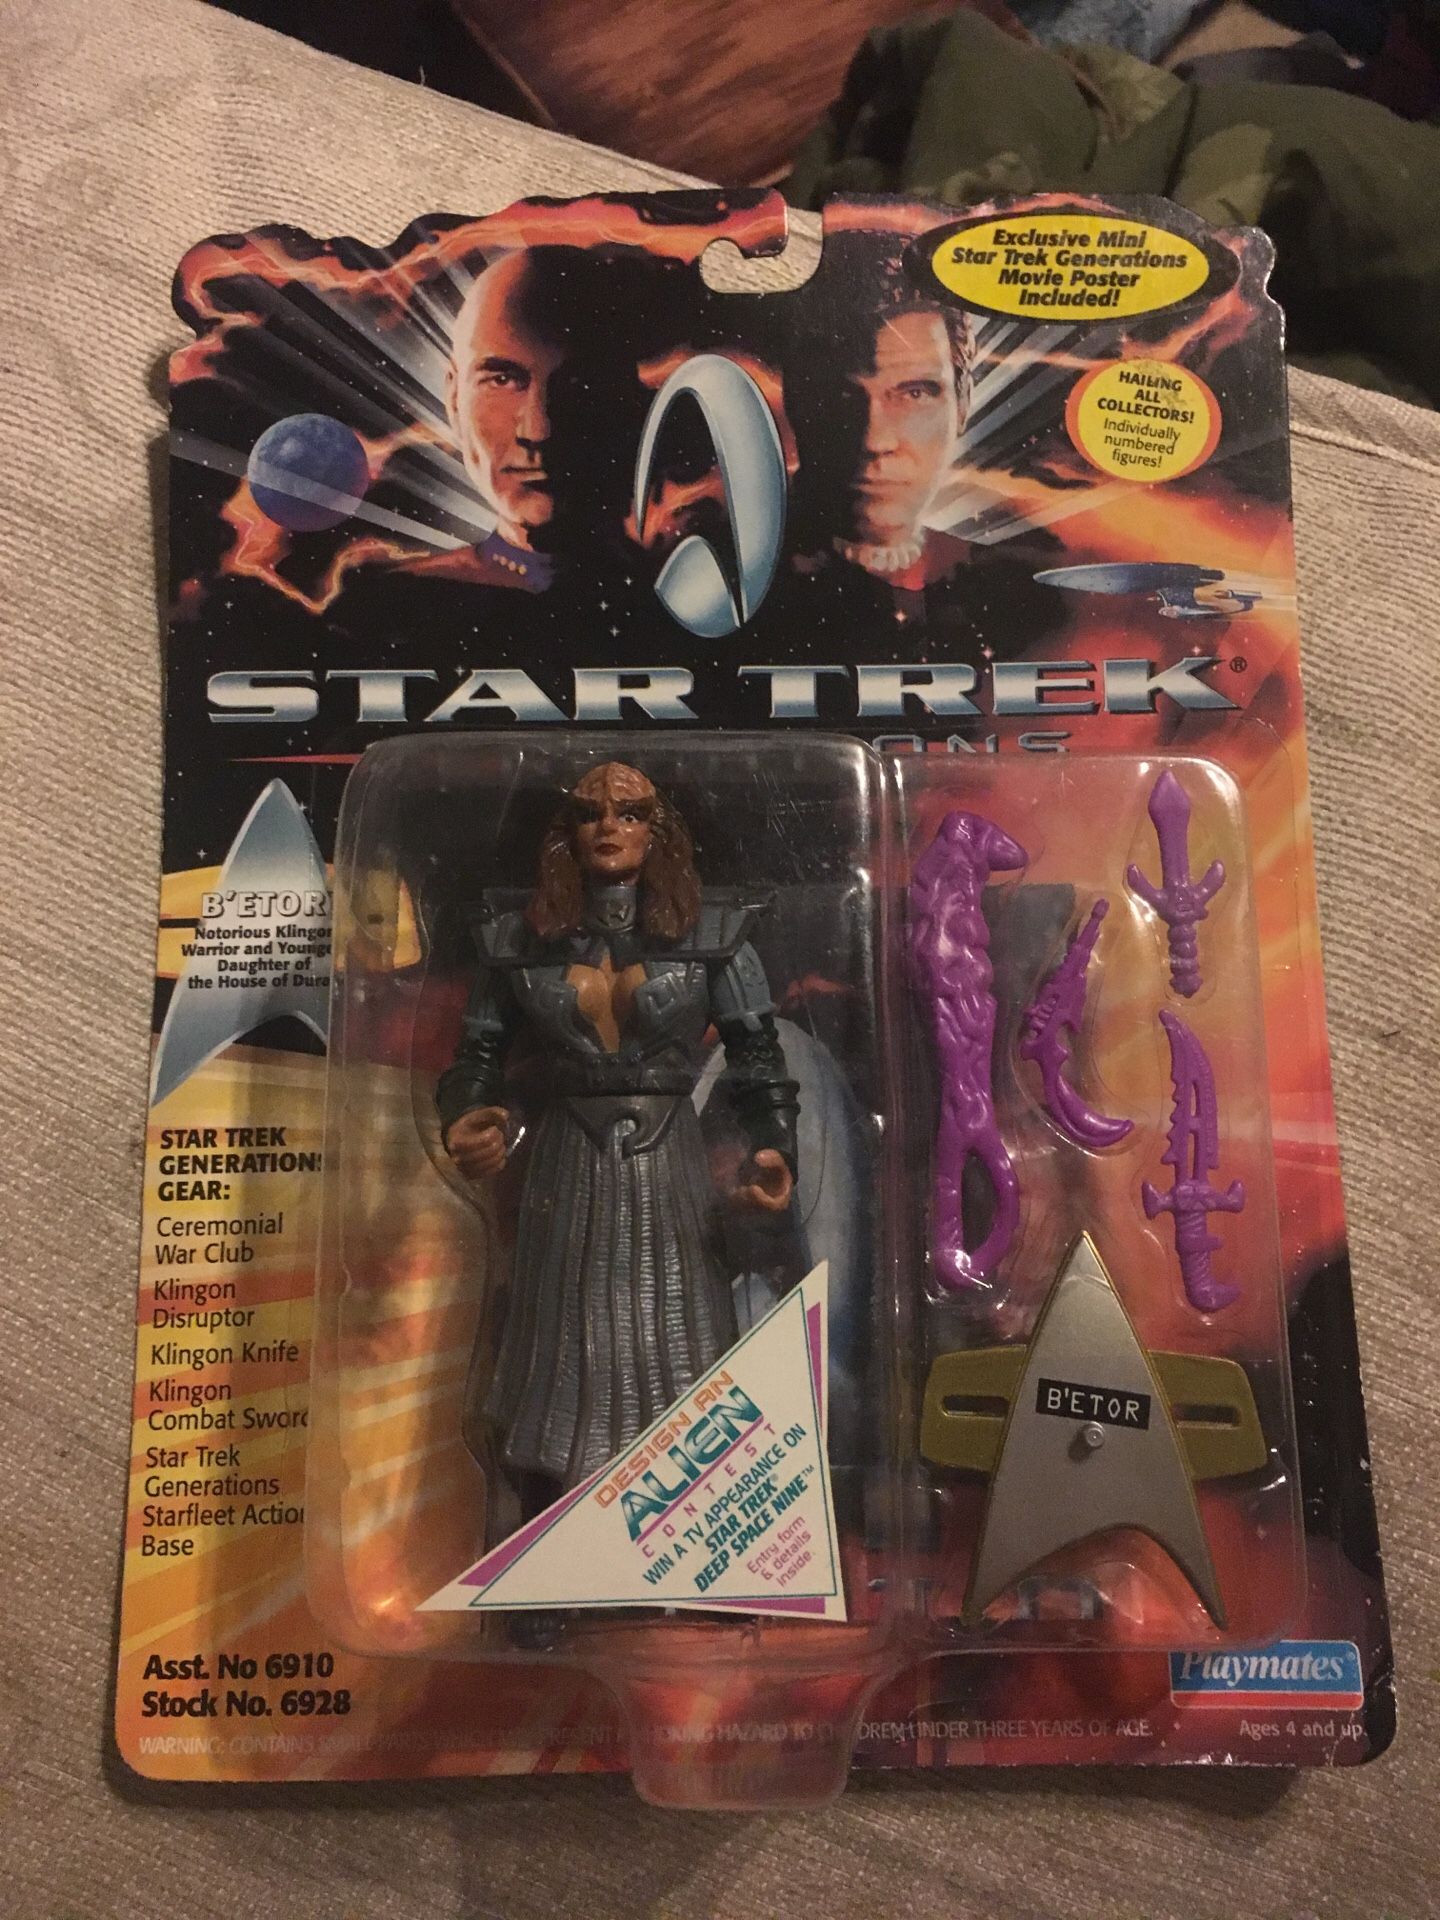 Star Trek generations action figure with movie poster behind the action figure collectible B’ETOR